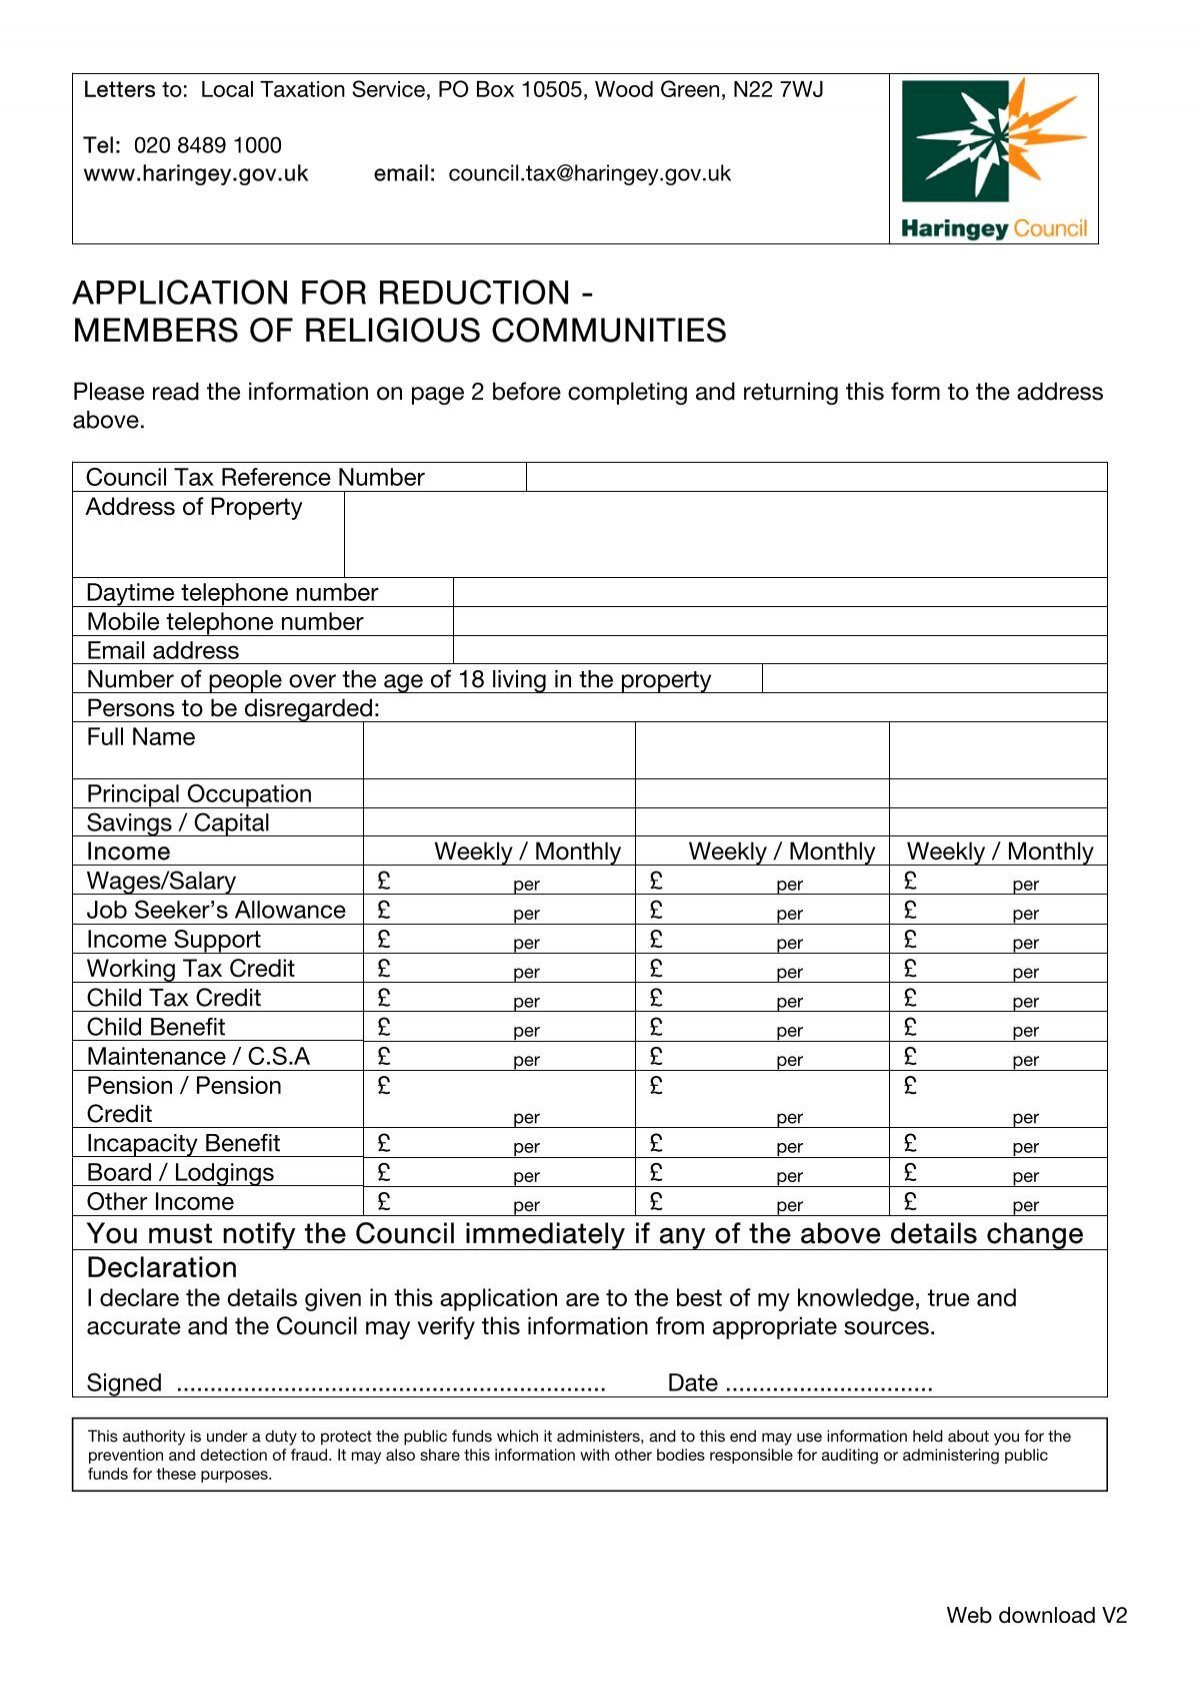 application-for-reduction-members-haringey-council